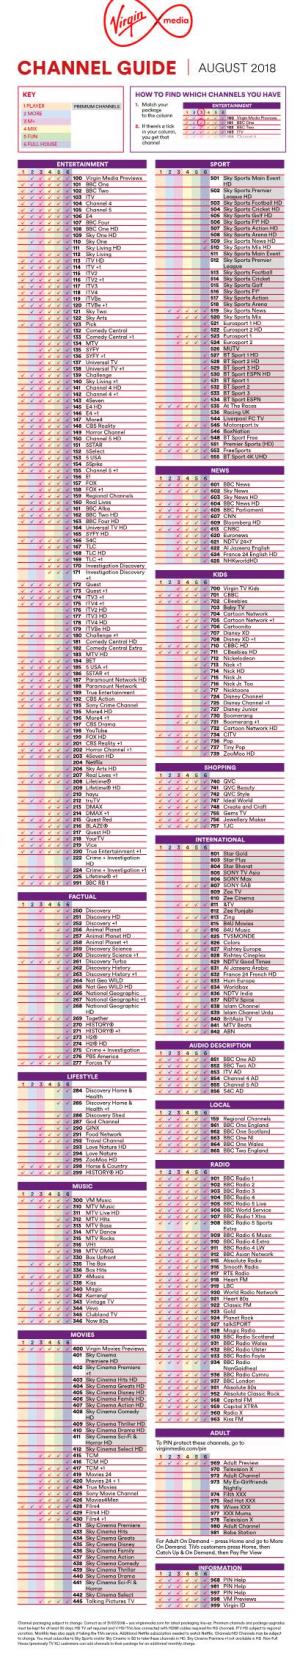 Channel Guide August 2018